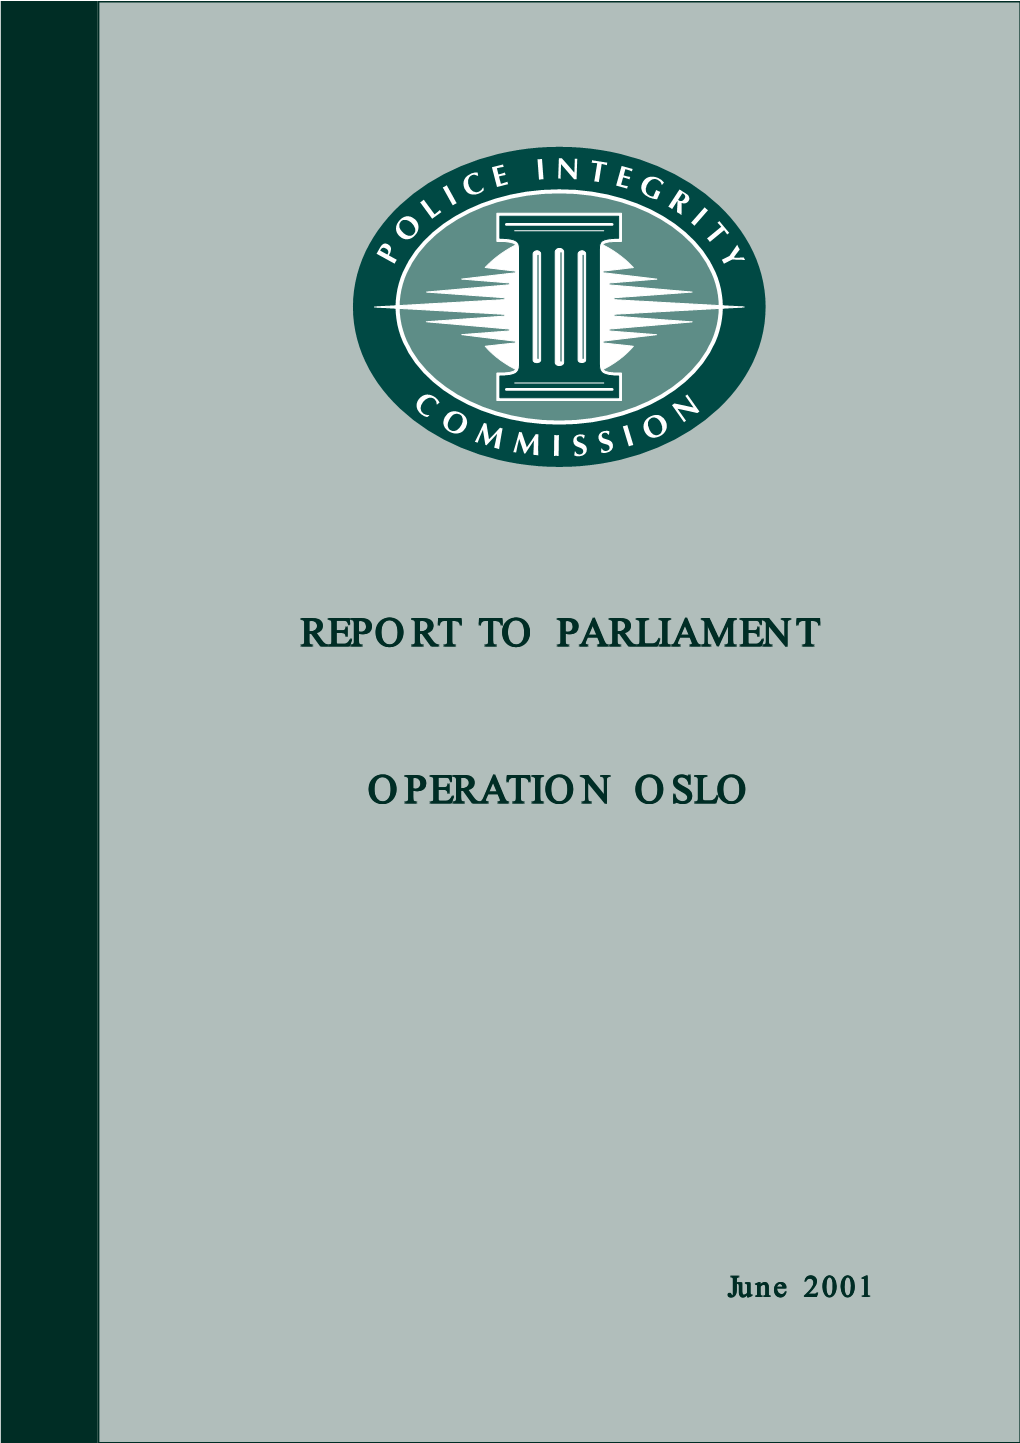 Report to Parliament Arliament Operation Oslo Tion Oslo